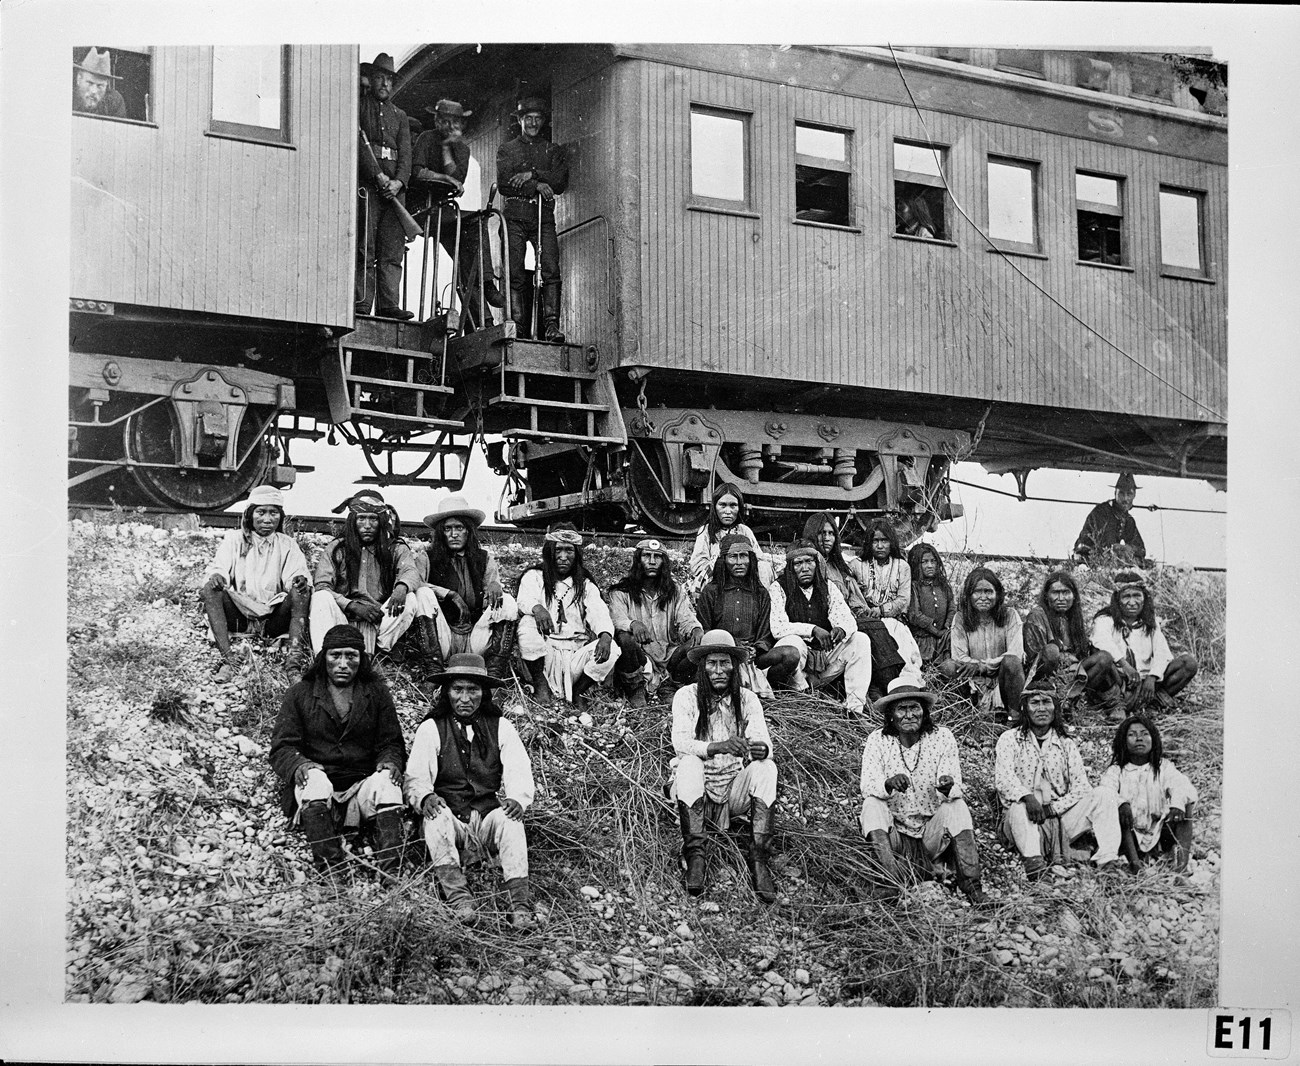 Group of men seated in front of train cars, guarded by Army soldiers standing on the train.